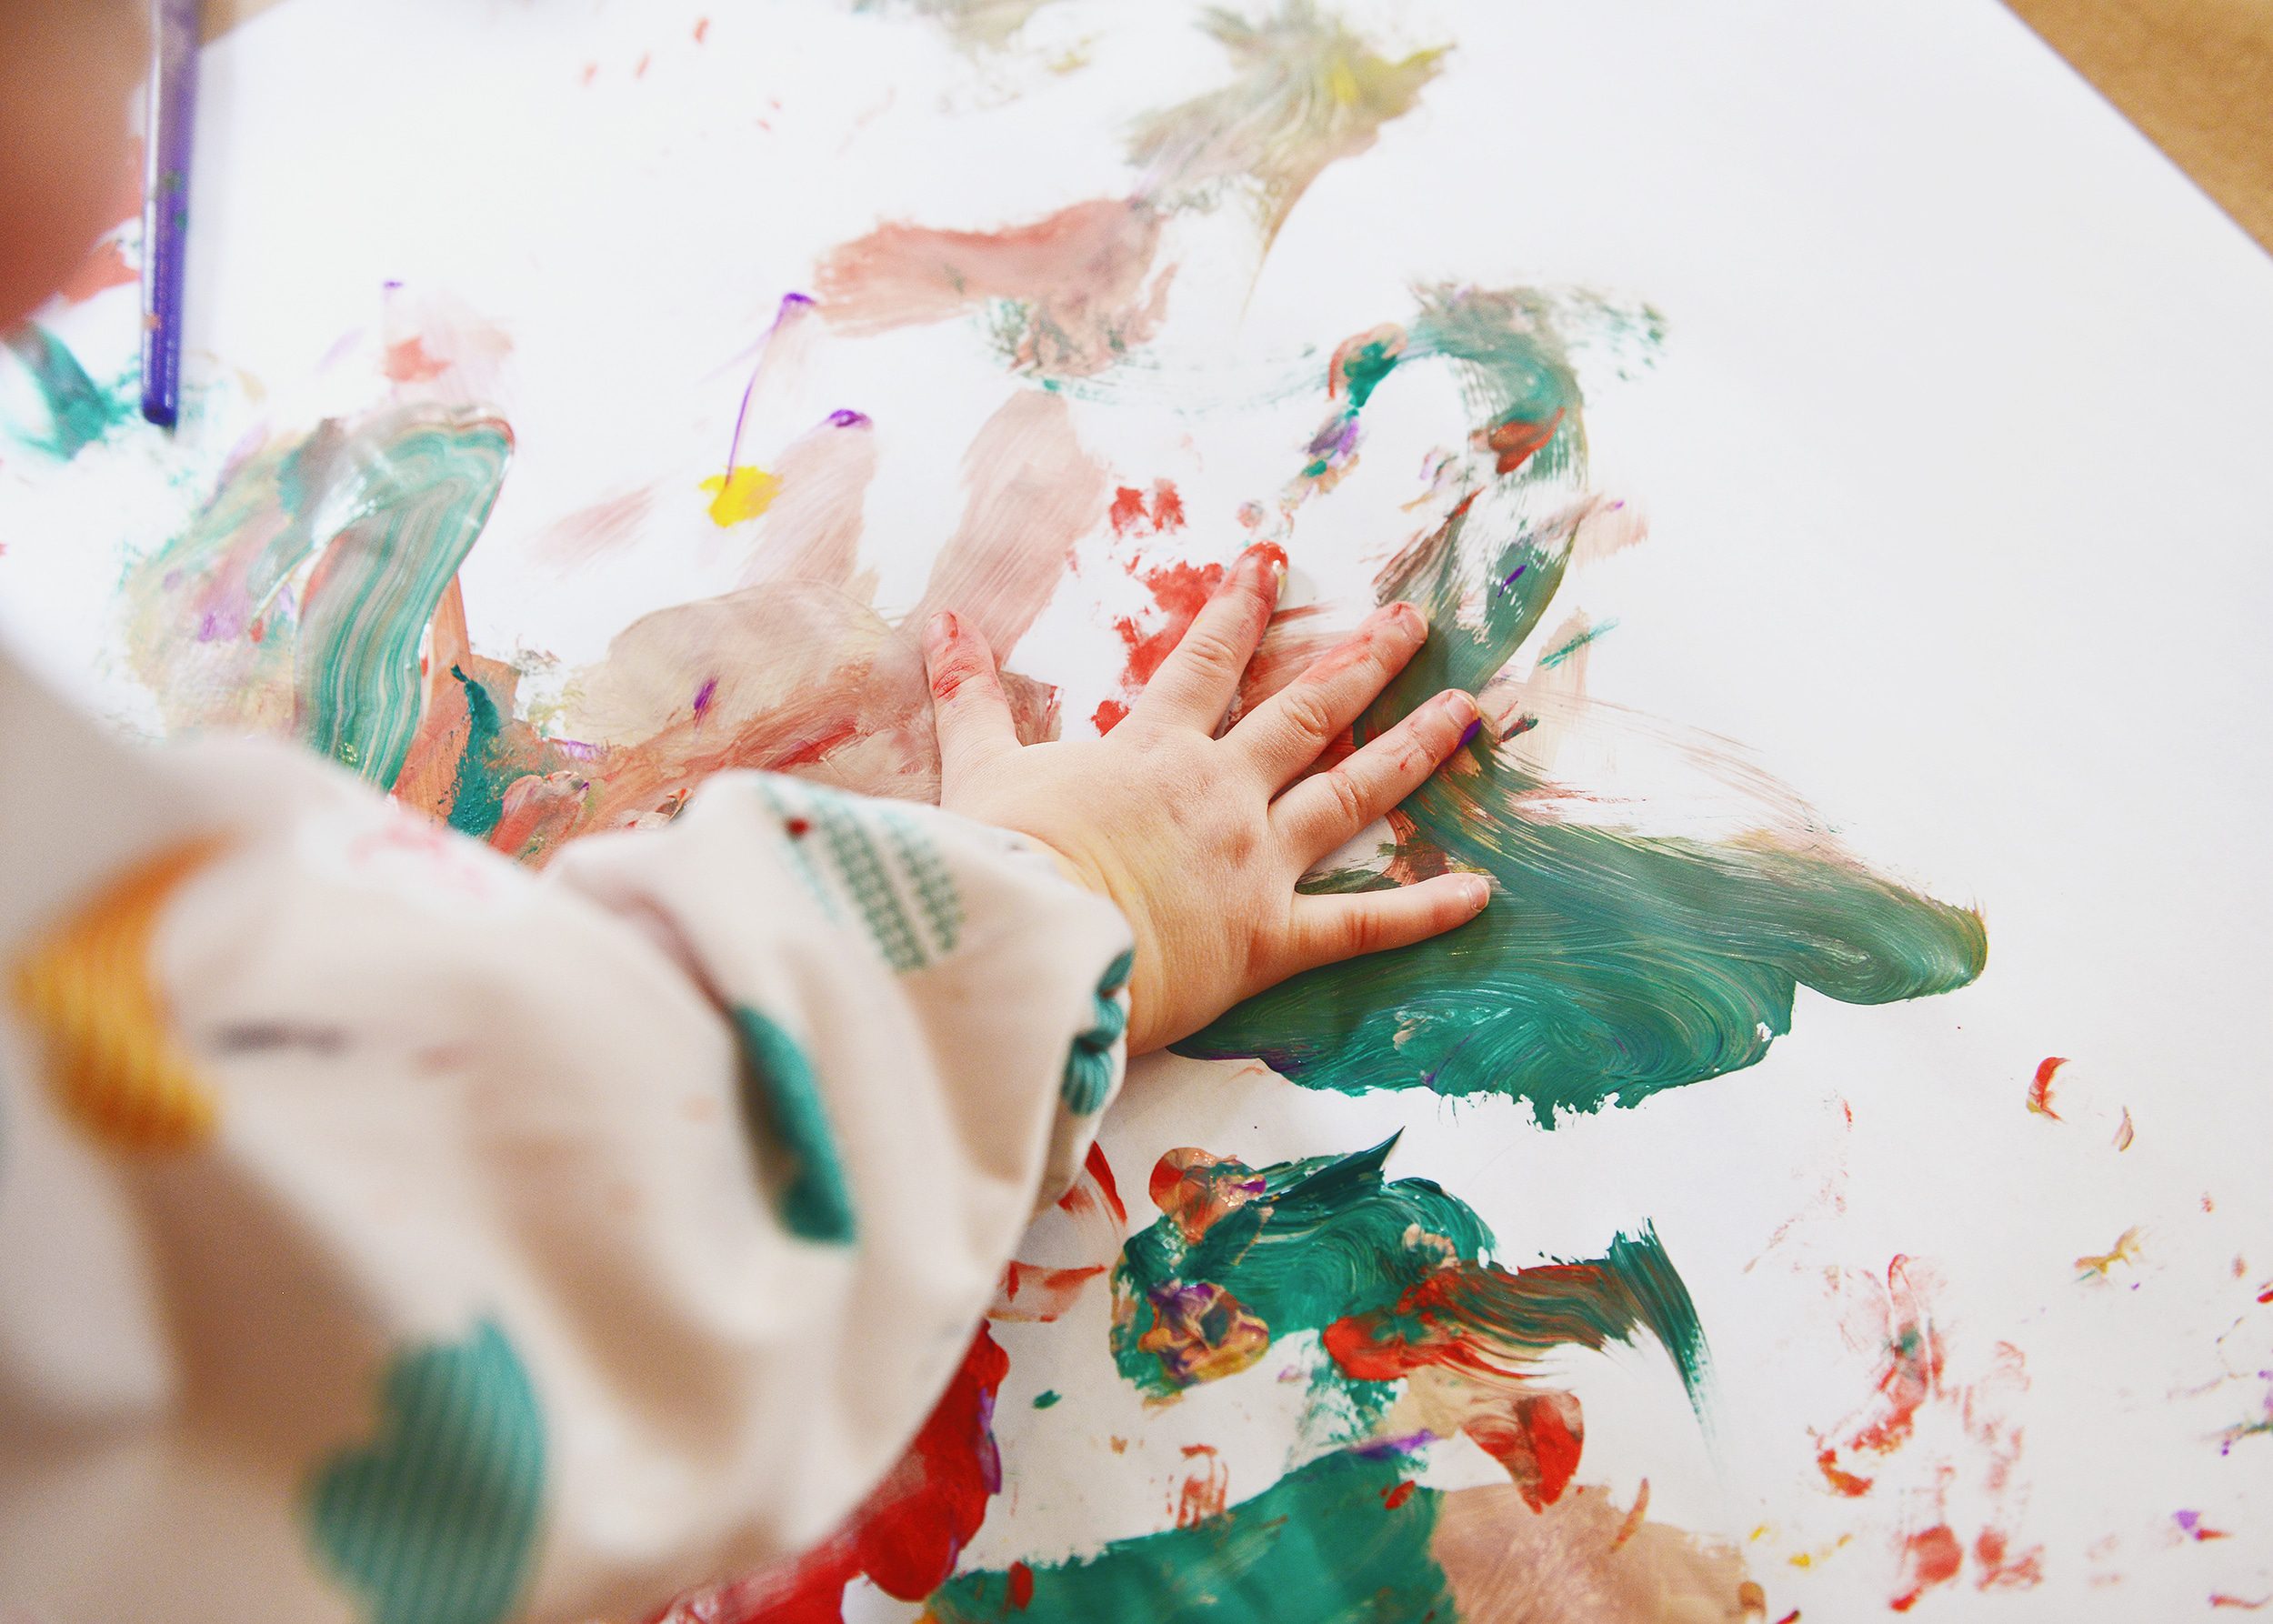 Lucy using her hands to create her painting | How to have a successful family art party! via Yellow Brick Home